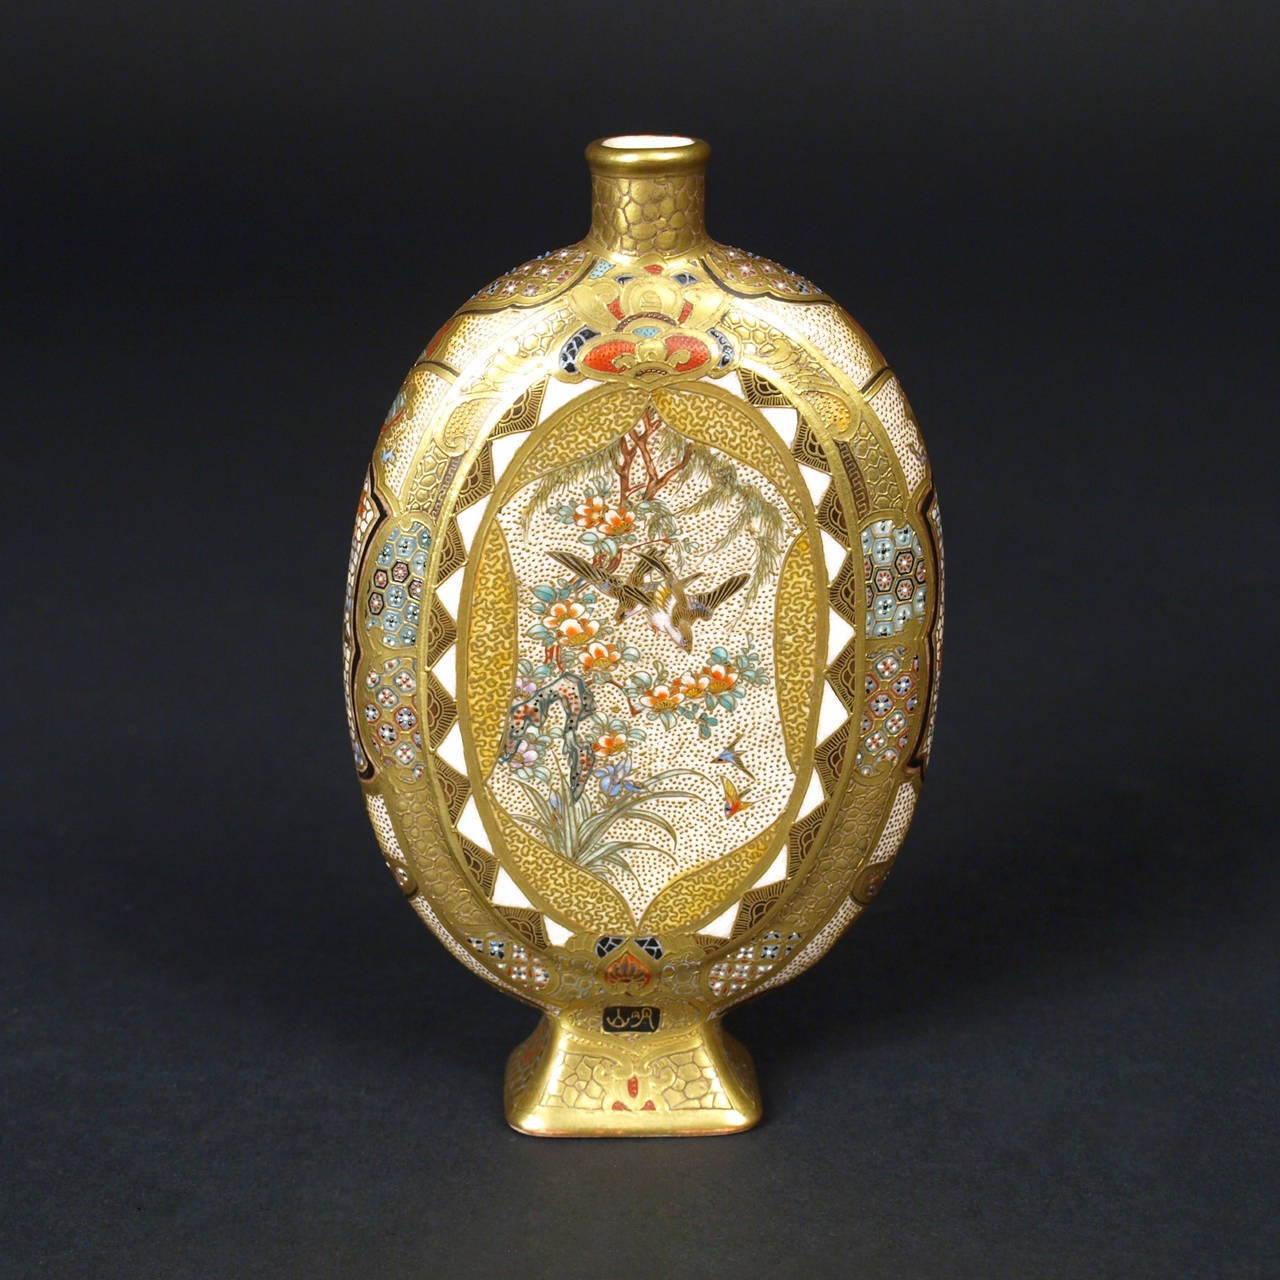 A fine pair of miniature Satsuma vases.
Signed Meizan, Meiji period (late 19th century).

The oval moon flask set on a splayed rectangular foot and painted in polychrome enamels and gilt on a clear, crackled ground with oval panels containing a